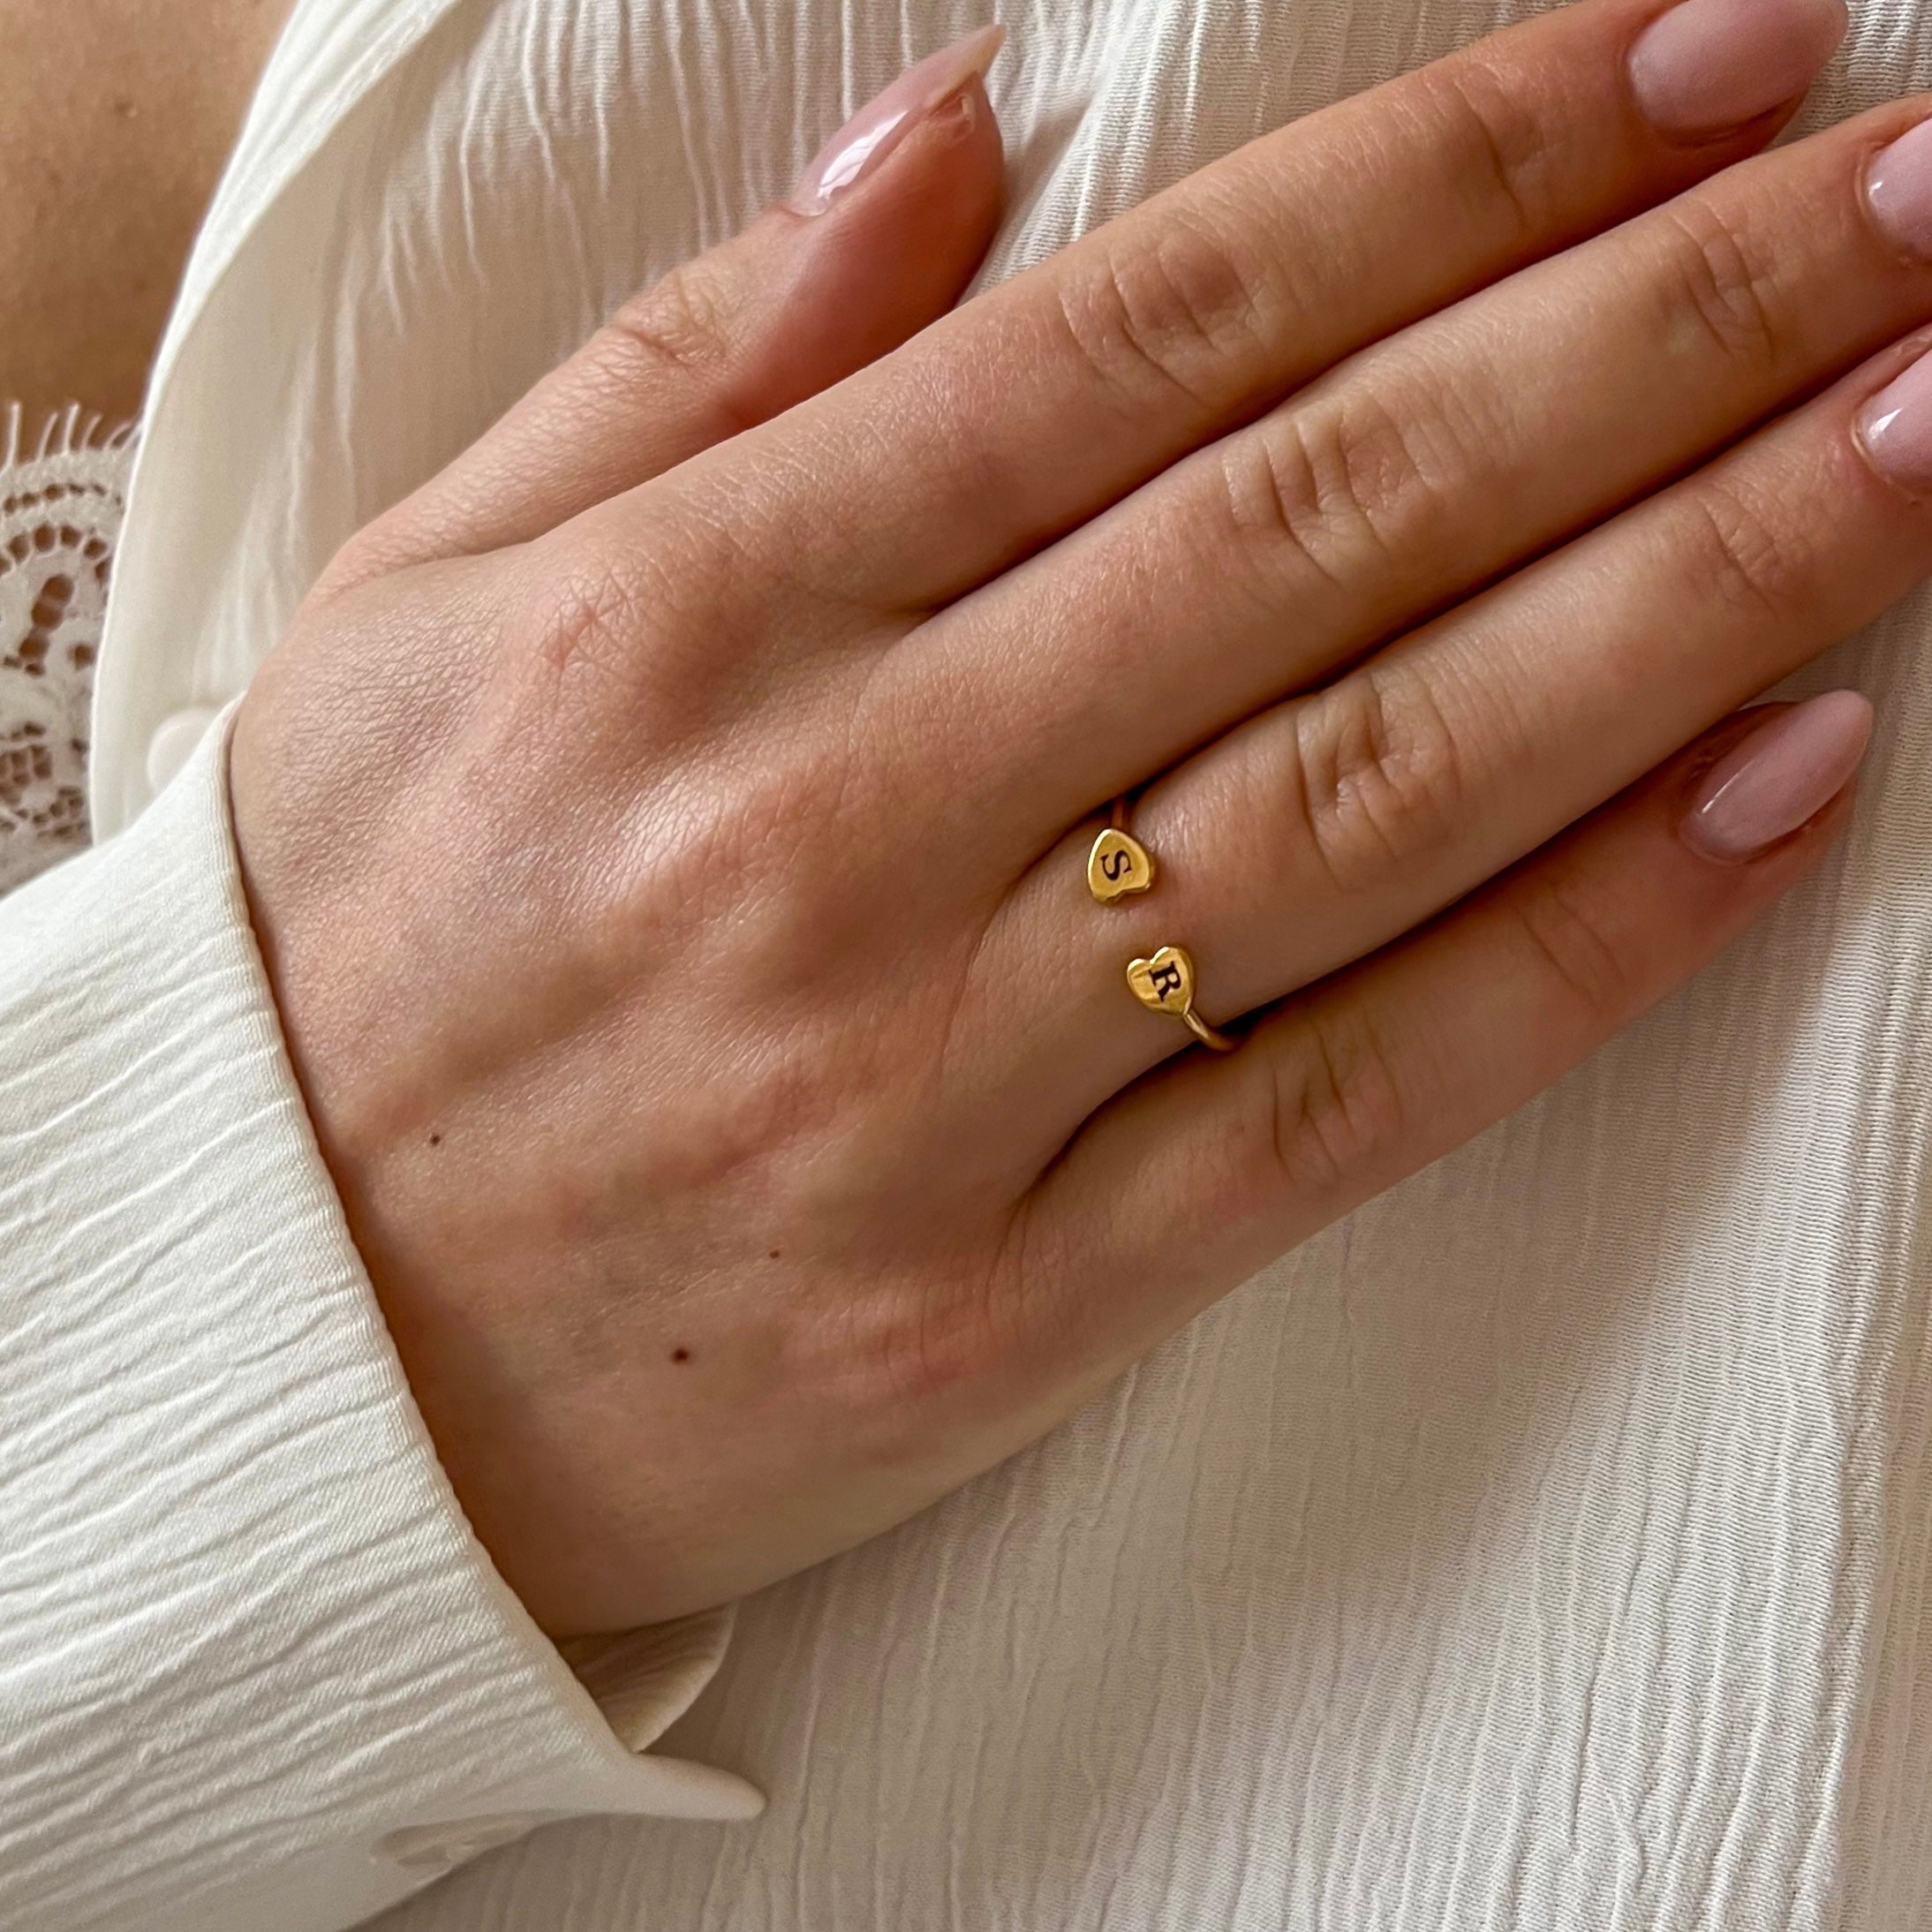 Handwritten Message Ring | Personalized Engraved Band Ring